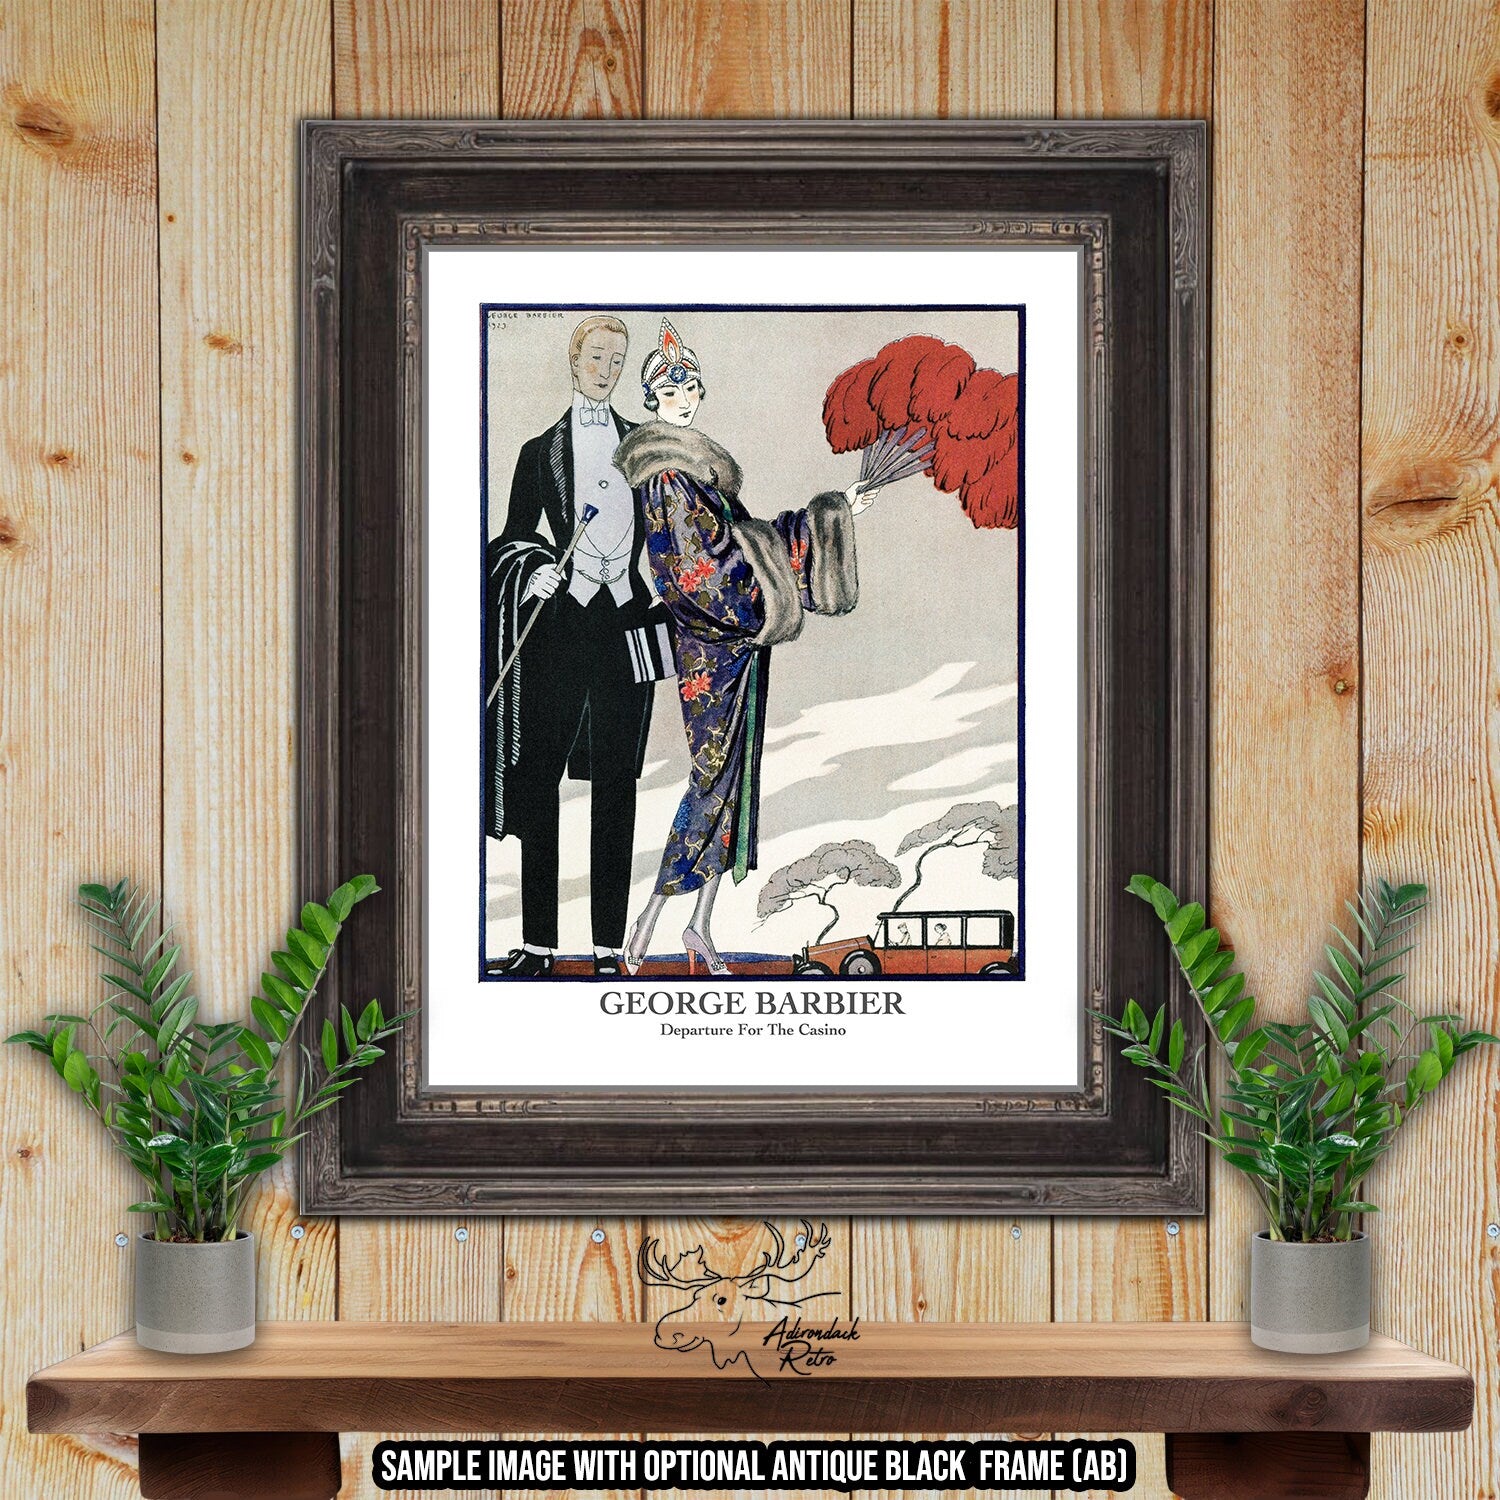 Ace and King of Clubs Playing Card Giclee Fine Art Prints - Big Slick - Black Jack